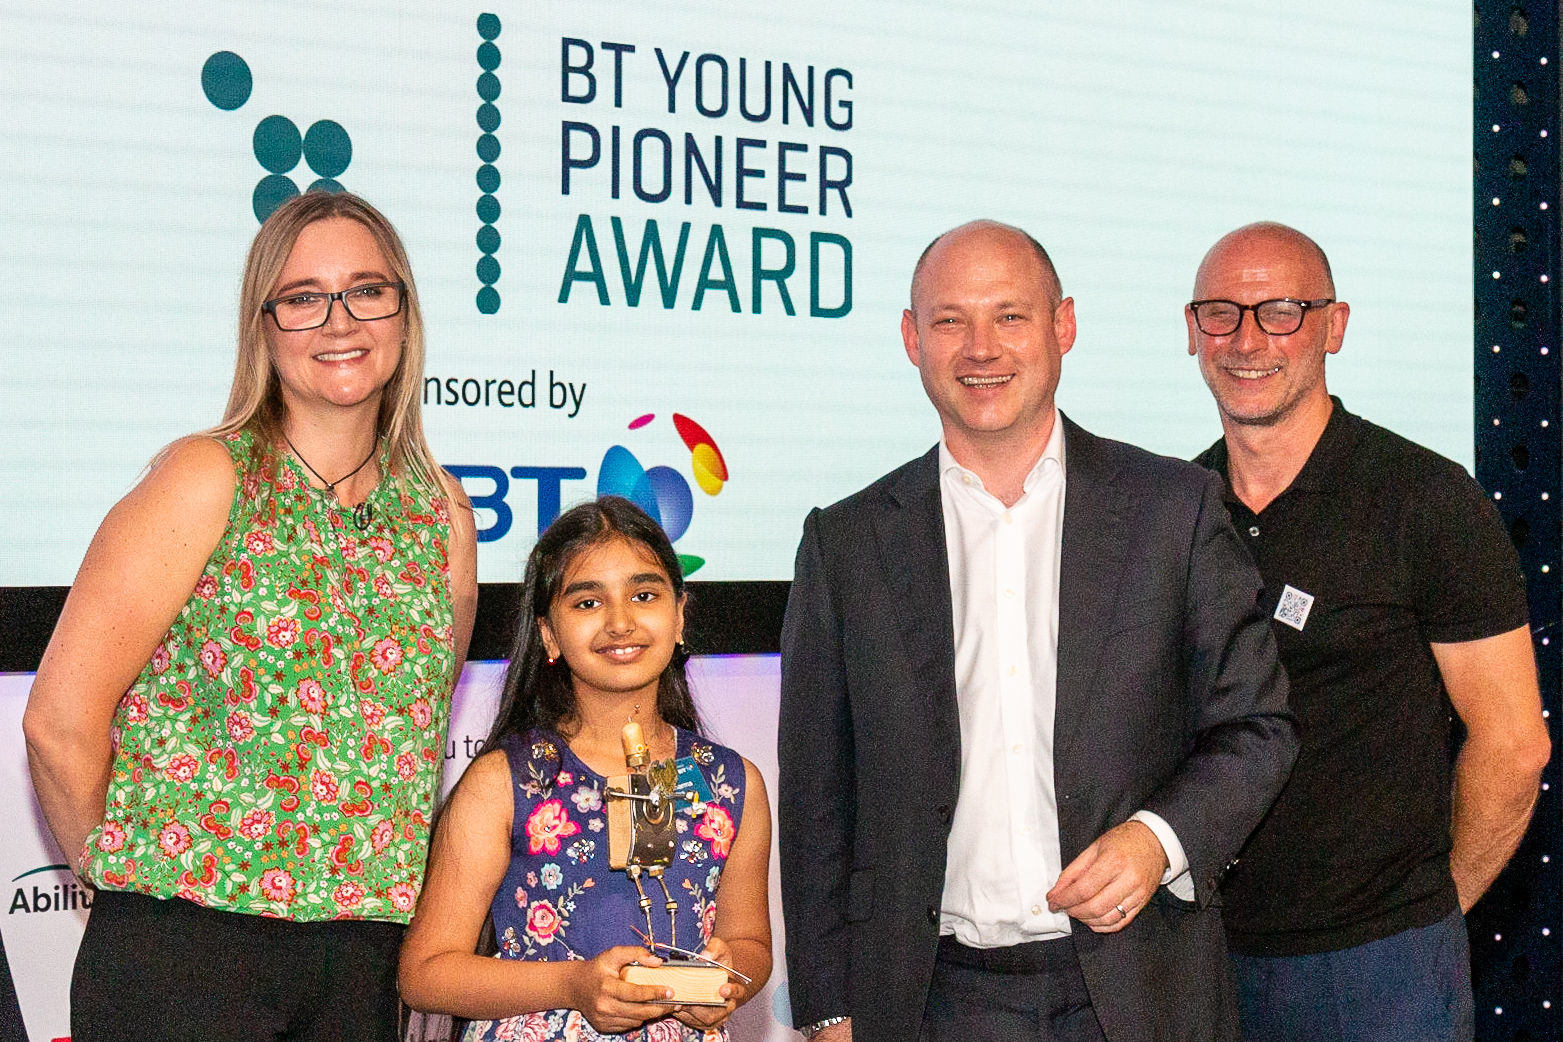 Kate Russell, Mihika Sharma (9), Andy Wales BT and Mark Walker on stage holding the BT Young Pioneer Award